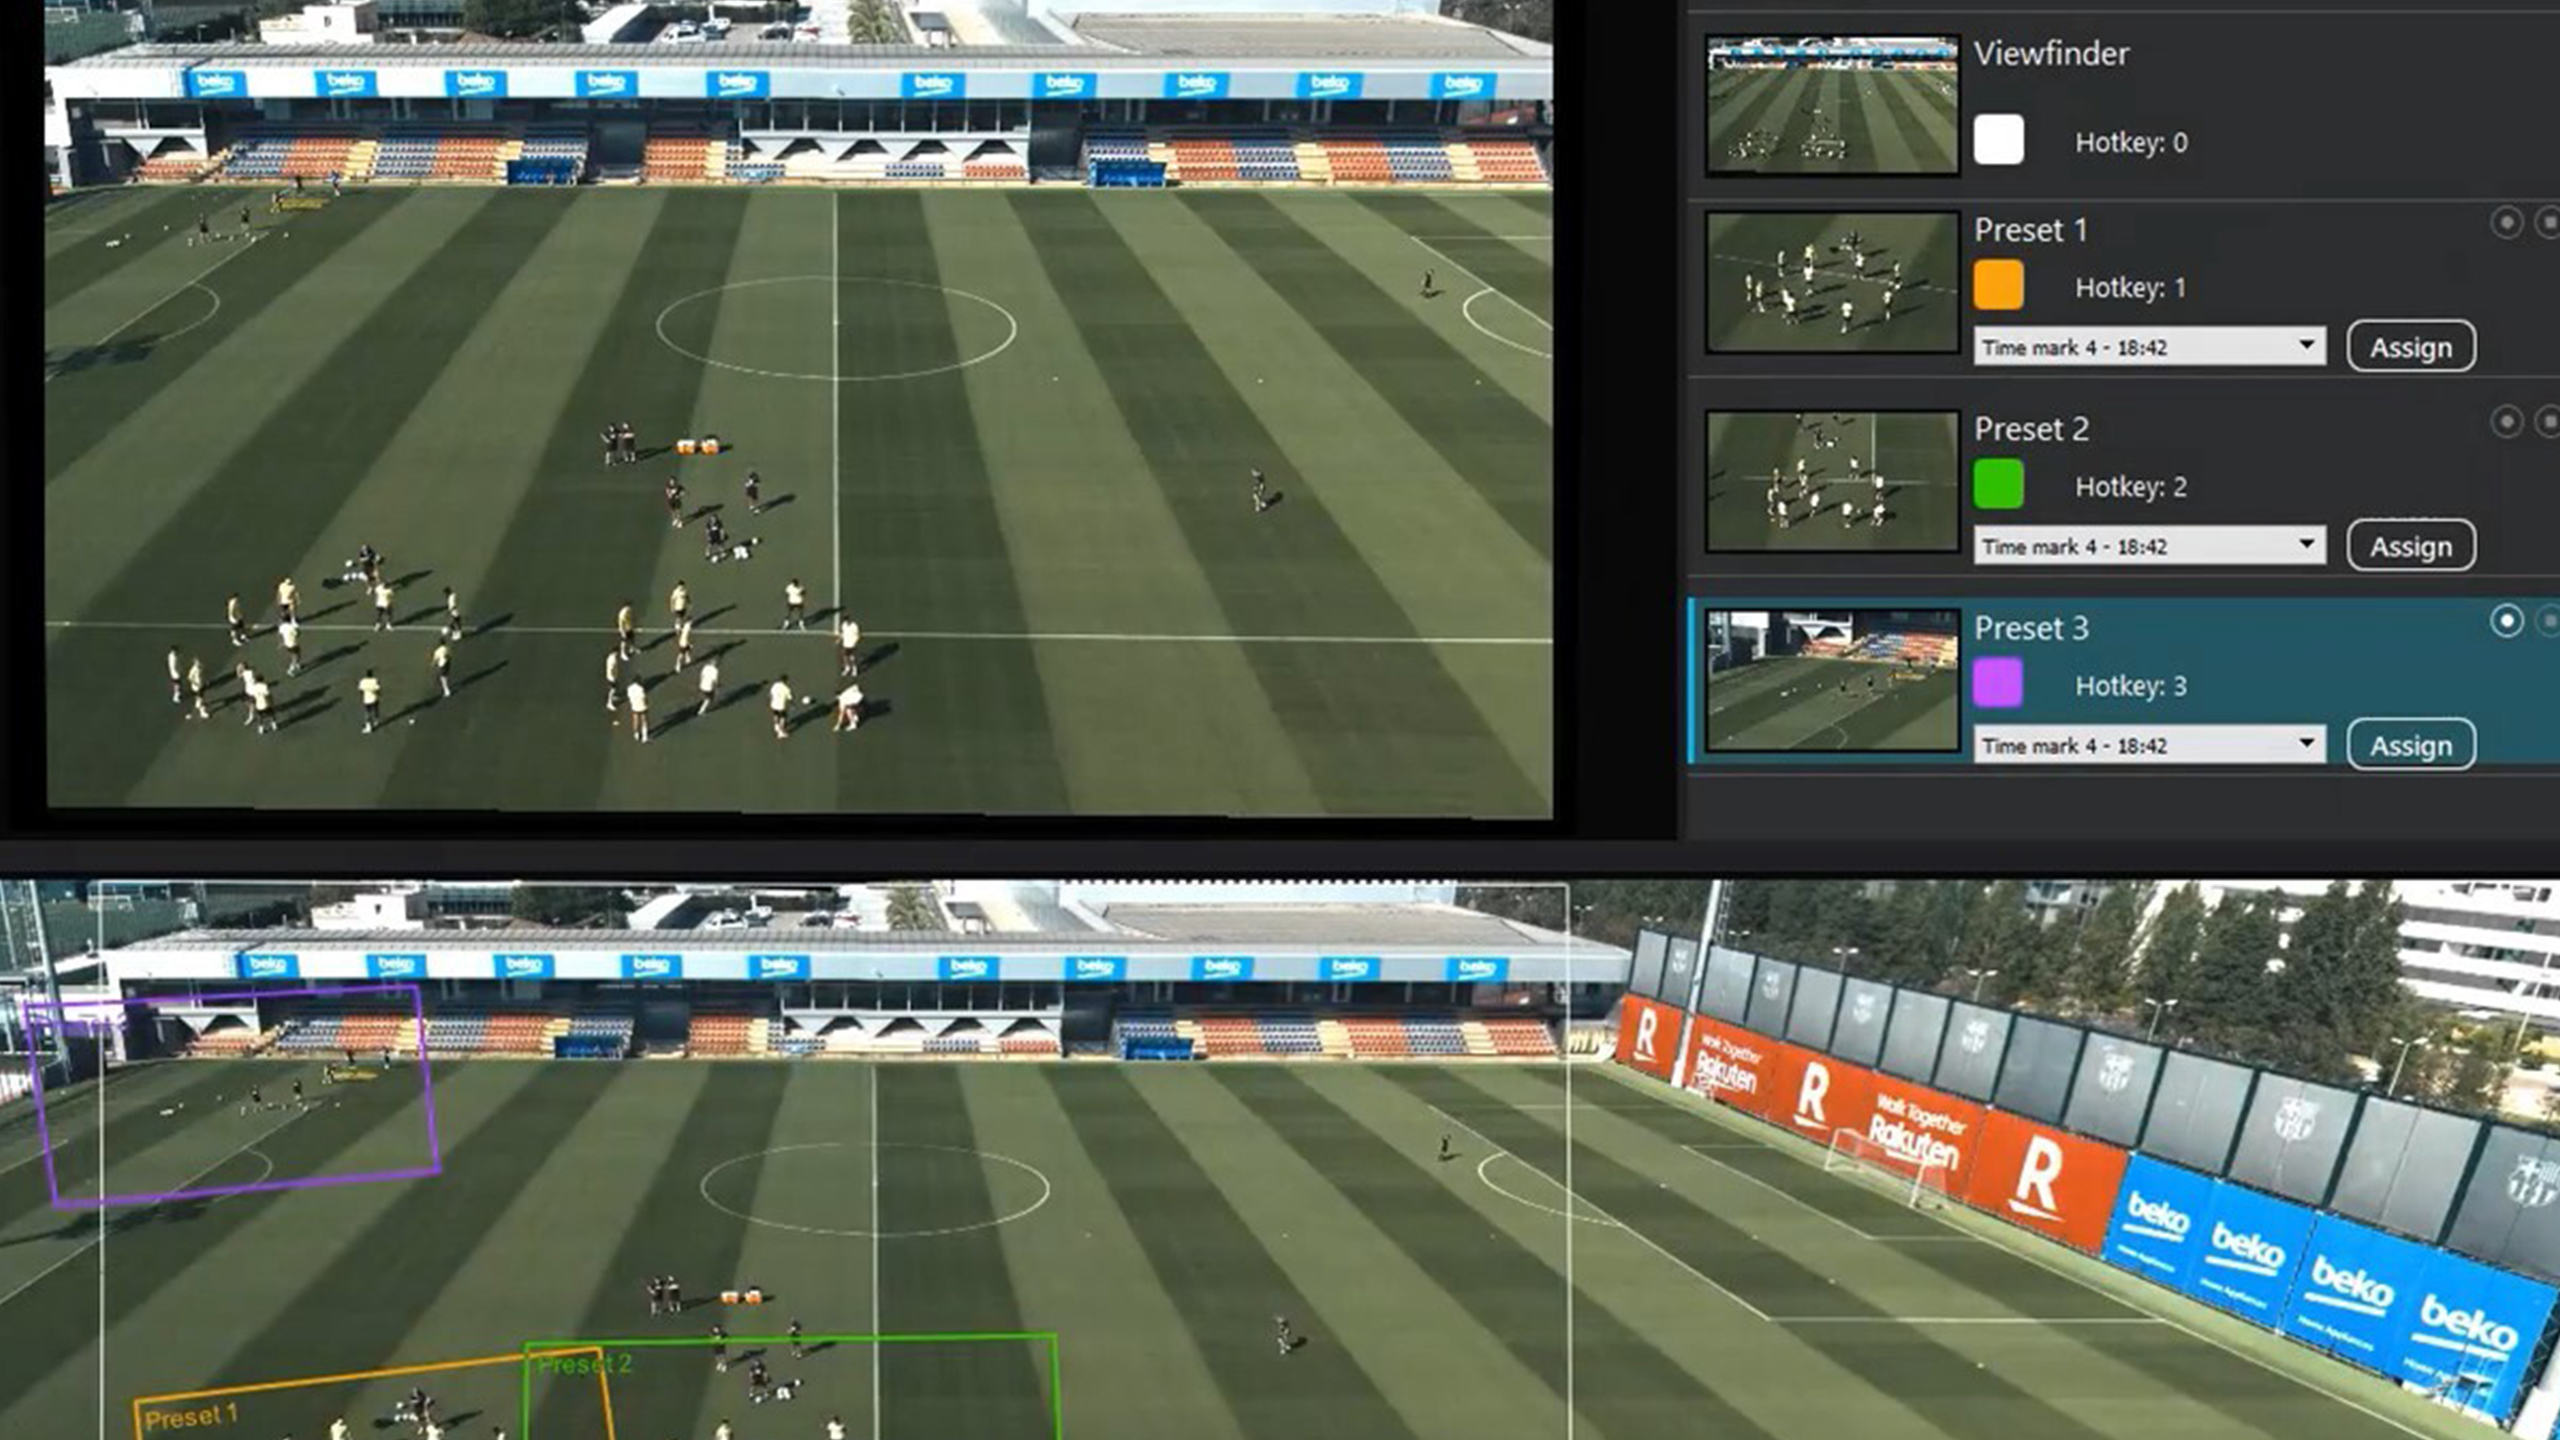 Computer vision analyzing soccer field